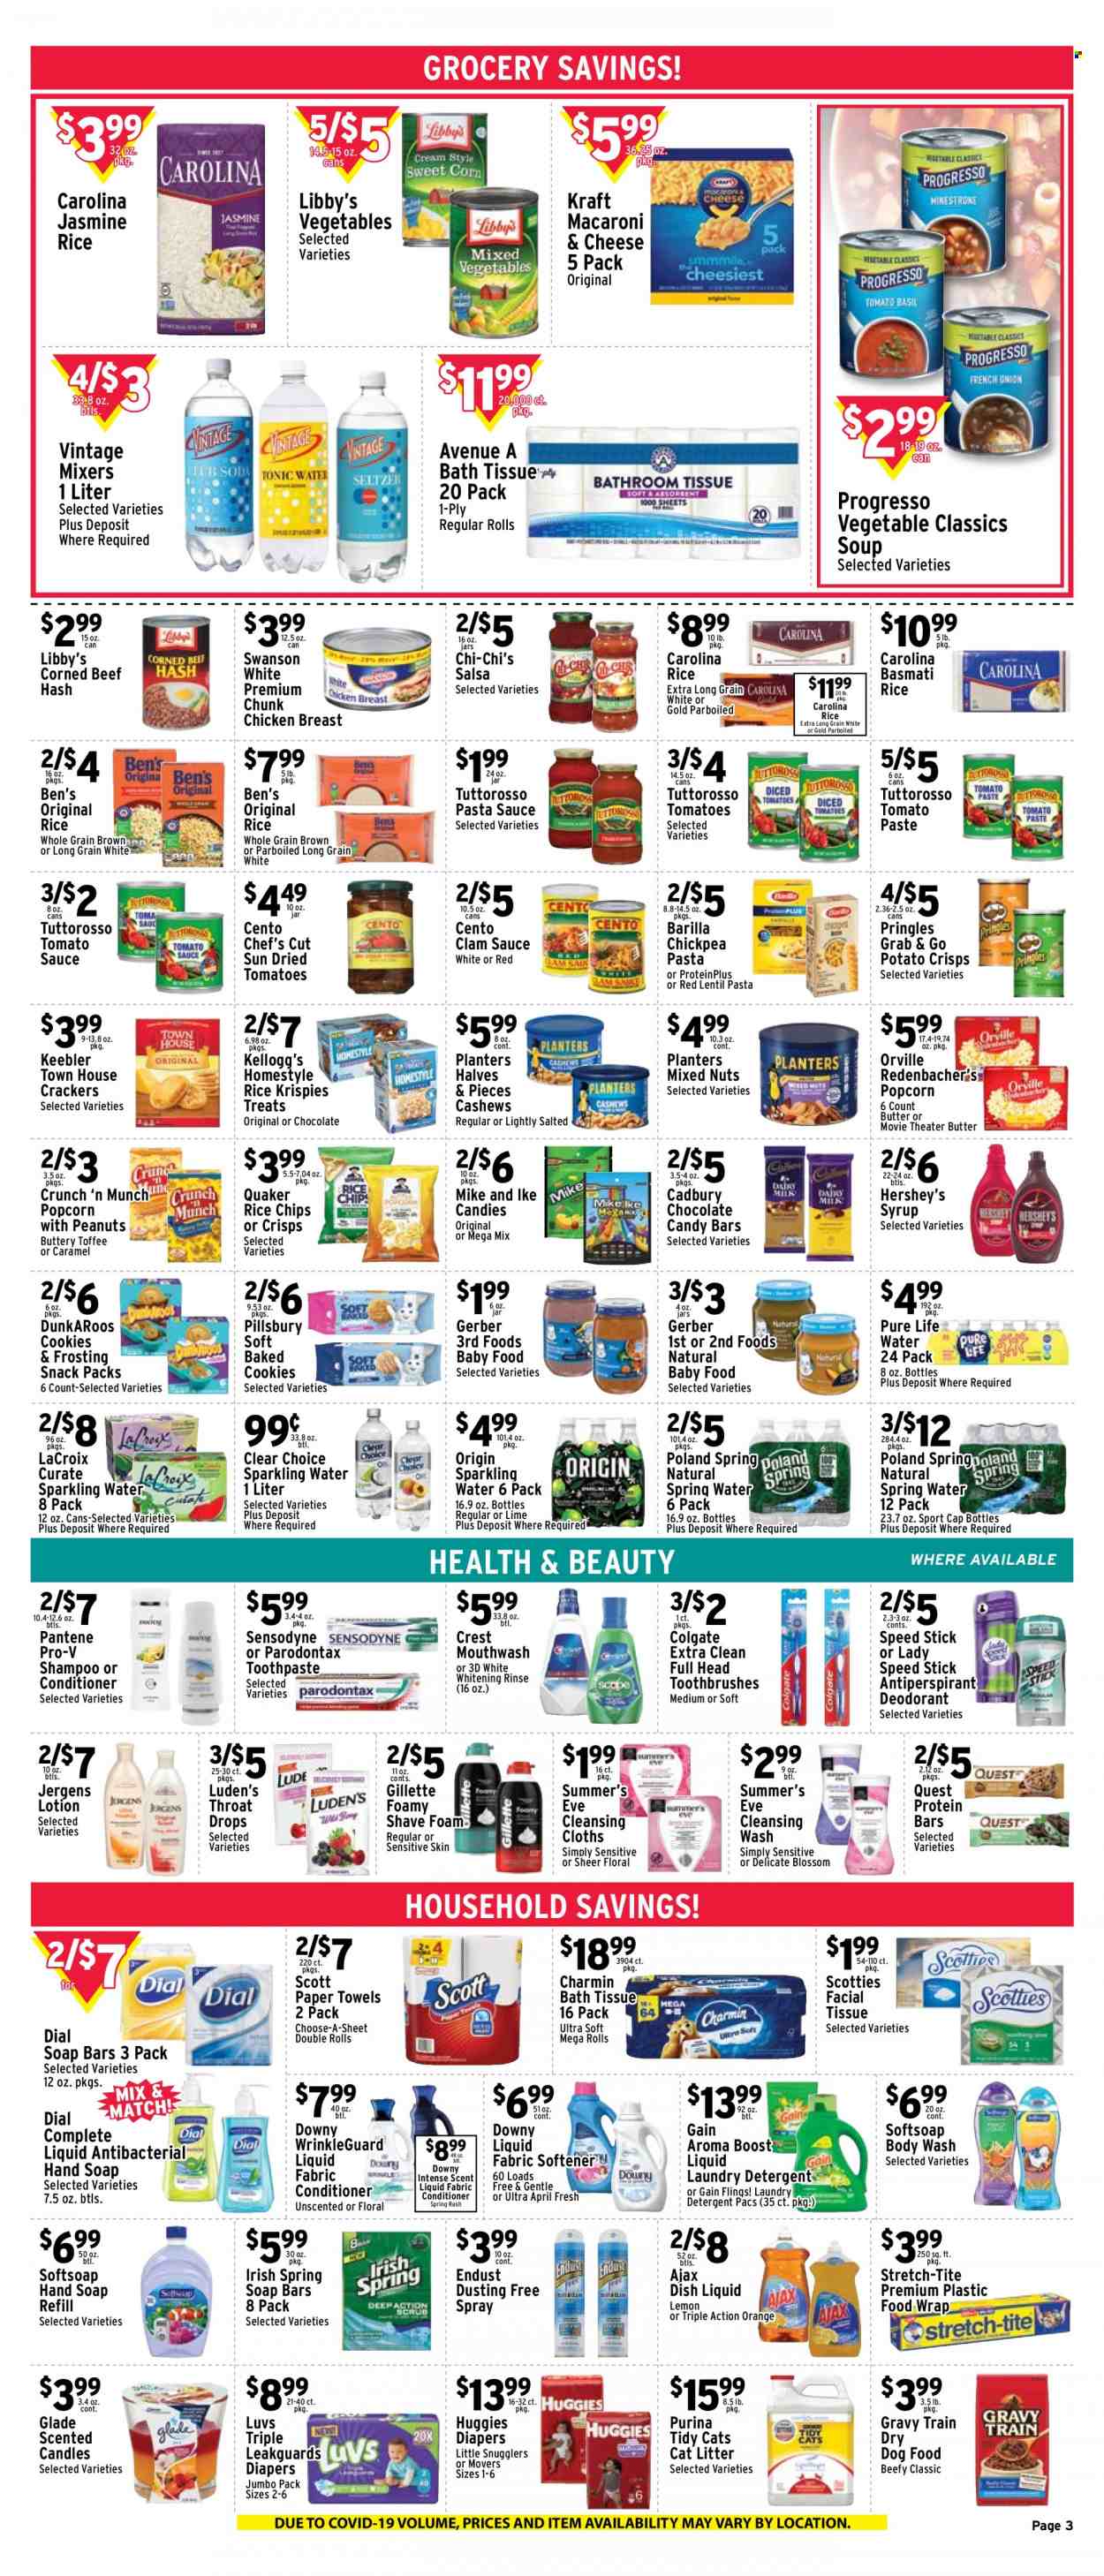 thumbnail - Met Foodmarkets Flyer - 09/25/2022 - 10/01/2022 - Sales products - oranges, clams, beef hash, macaroni & cheese, pasta sauce, soup, sauce, Pillsbury, Barilla, Quaker, Progresso, Kraft®, corned beef, butter, Blossom, Hershey's, cookies, snack, toffee, crackers, Kellogg's, Cadbury, chocolate candies, Keebler, Gerber, potato crisps, Pringles, chips, popcorn, frosting, dried tomatoes, tomato paste, tomato sauce, protein bar, Rice Krispies, basmati rice, jasmine rice, parboiled rice, salsa, syrup, cashews, mixed nuts, Planters, spring water, sparkling water, Pure Life Water, Boost, chicken breasts, beef meat. Page 3.